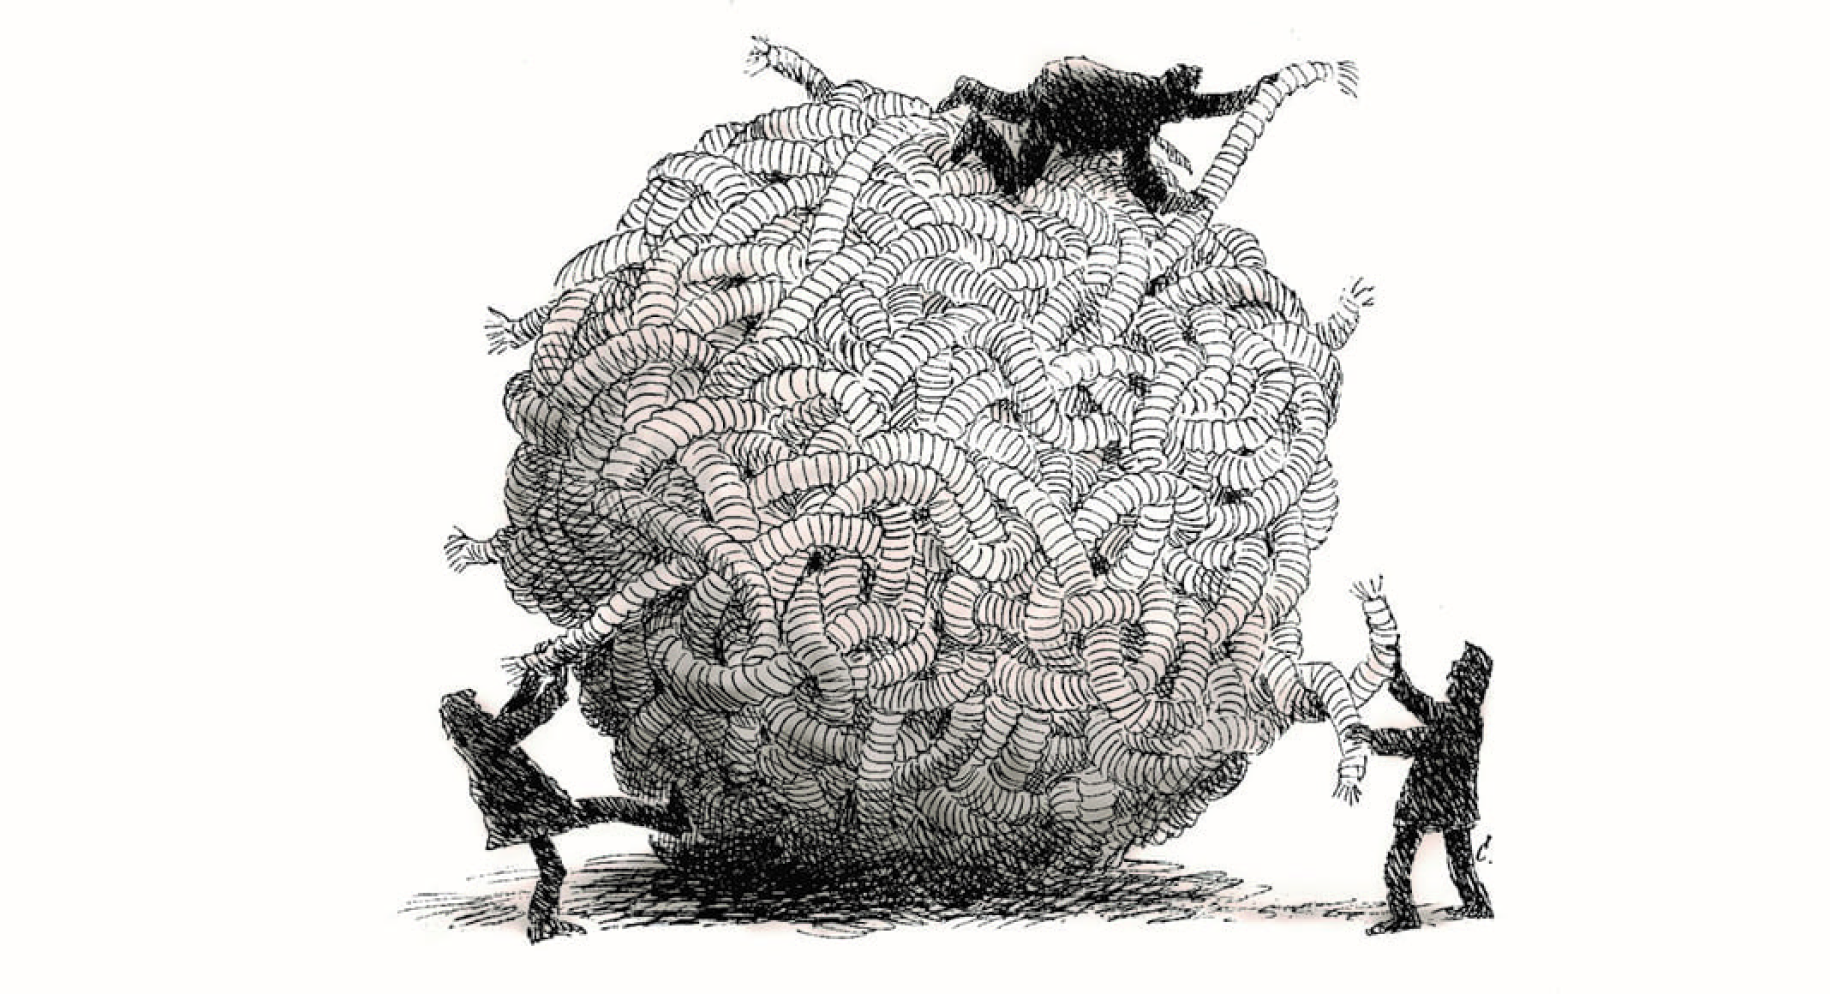 The New Gordian Knot